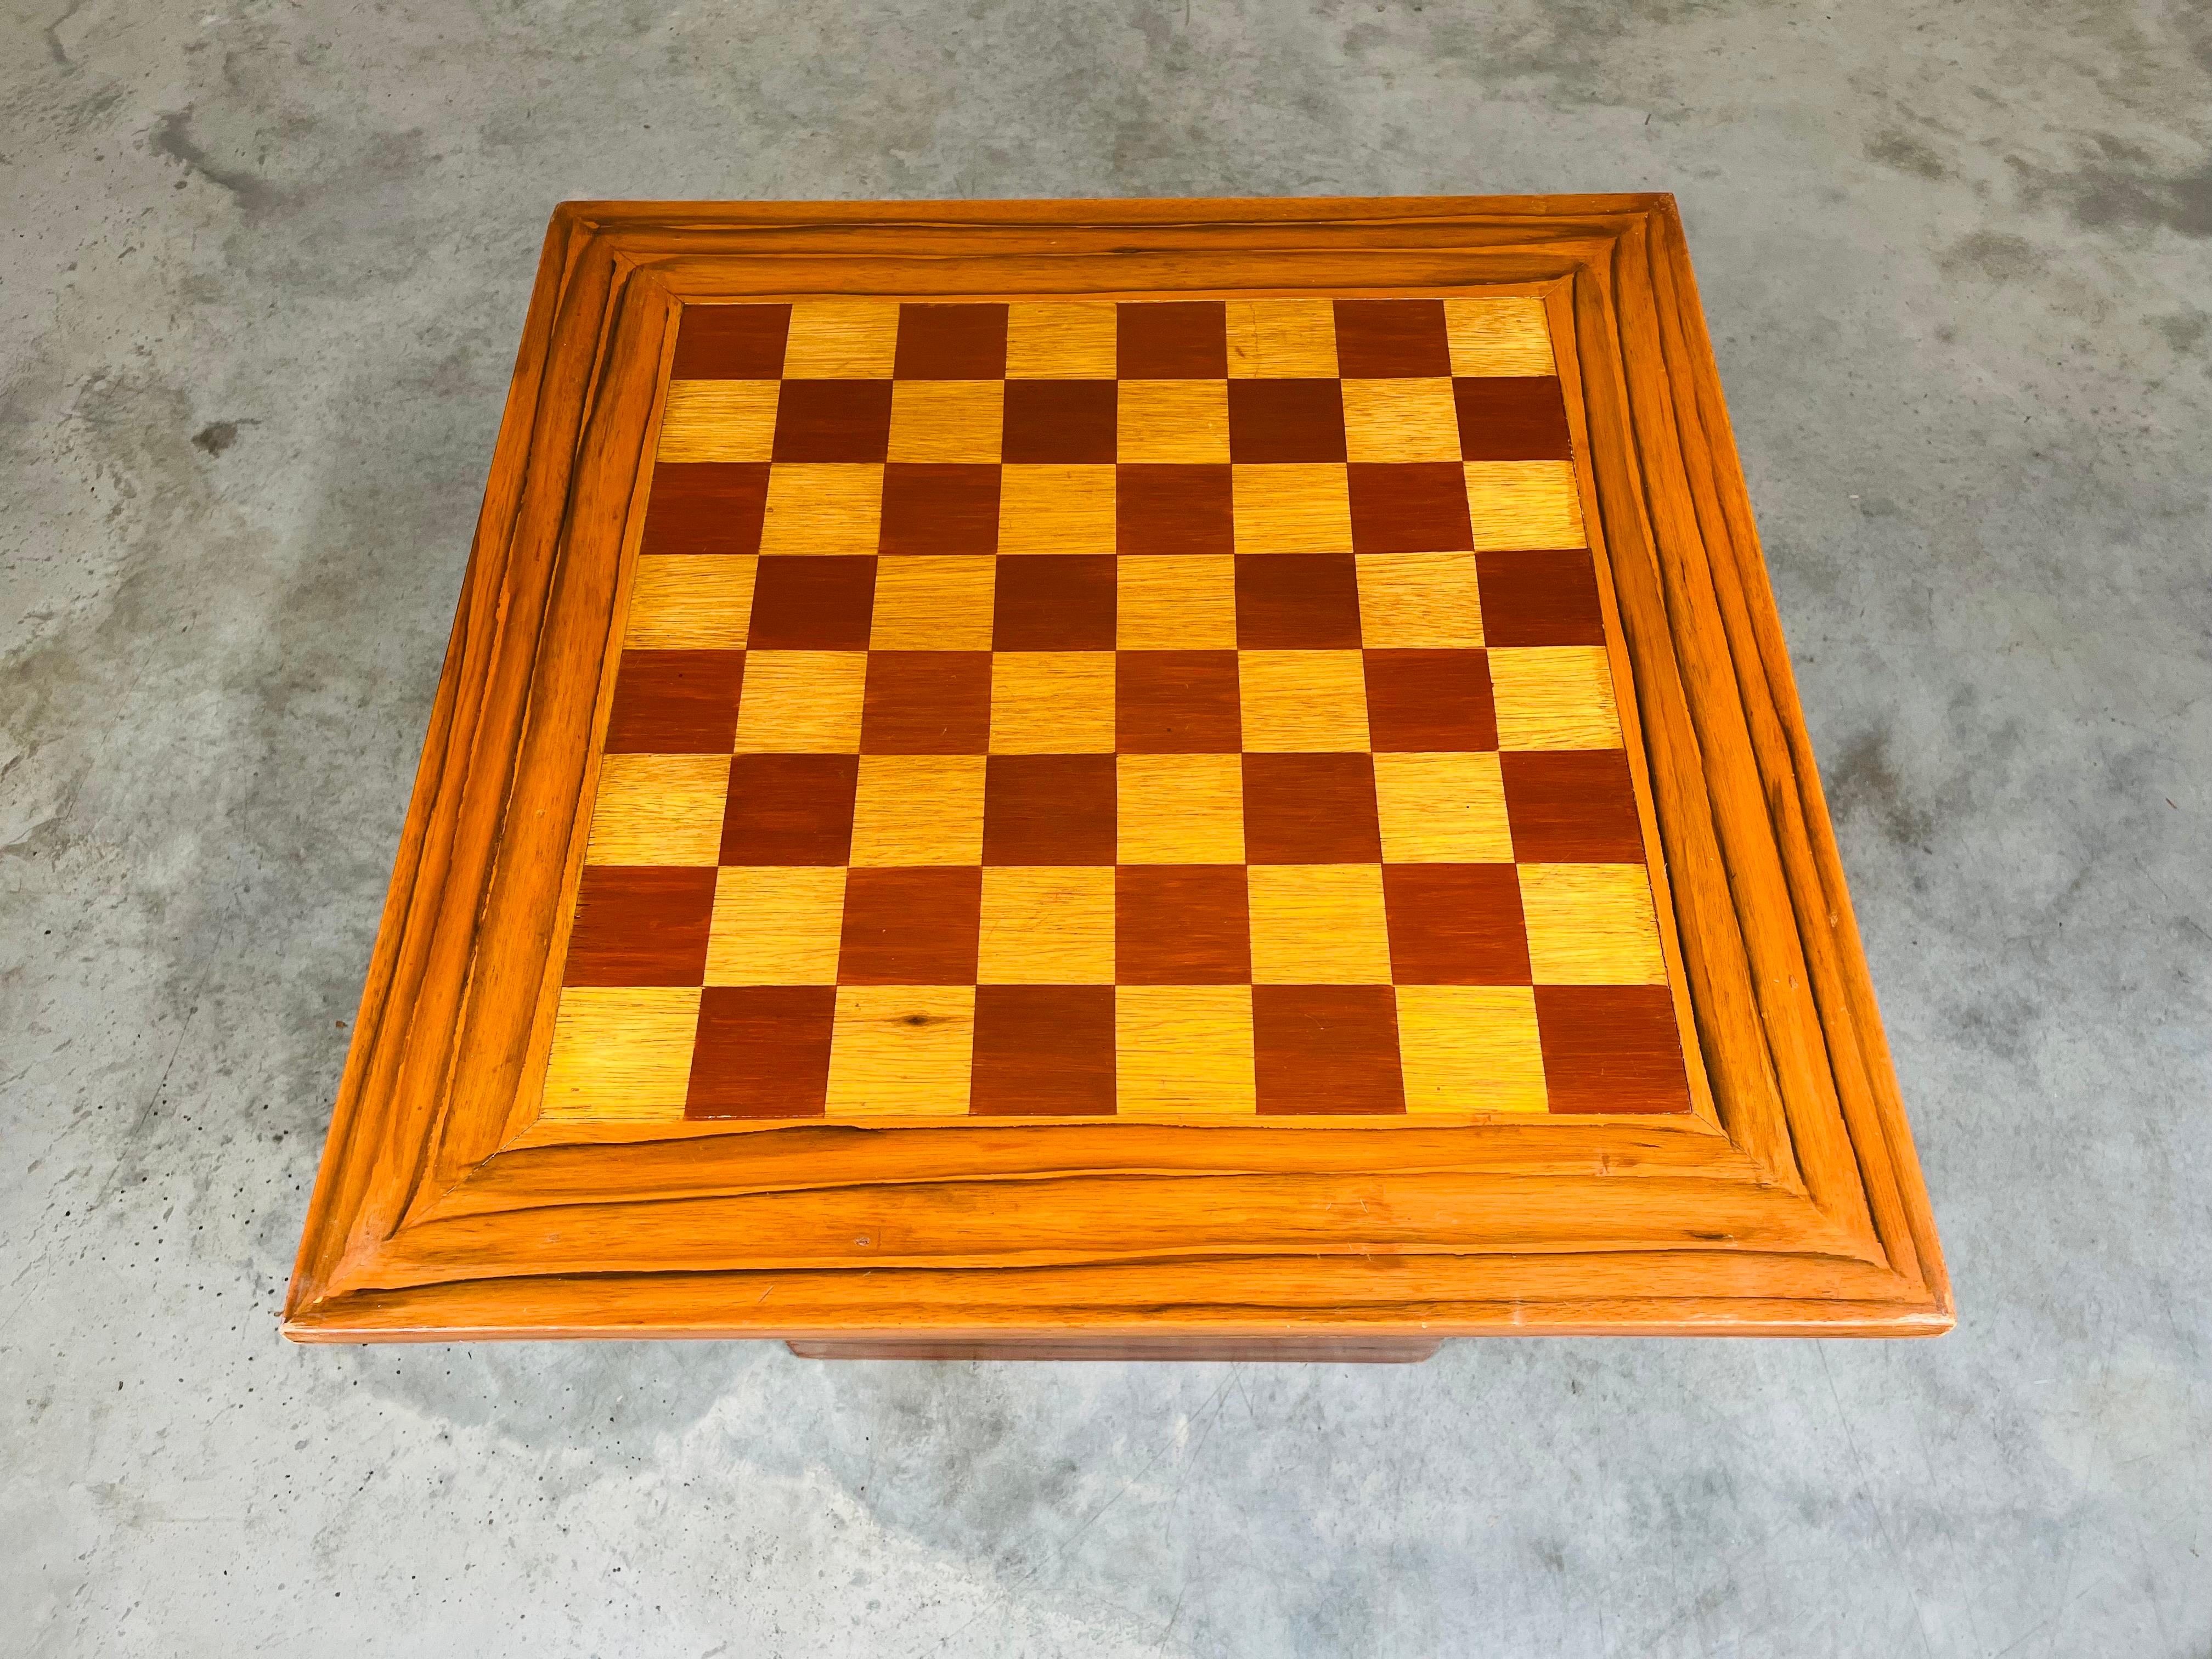 Hollywood Regency American Fantasy Knight Chess Table After William ‘Billy’ Haines Circa 1960 For Sale